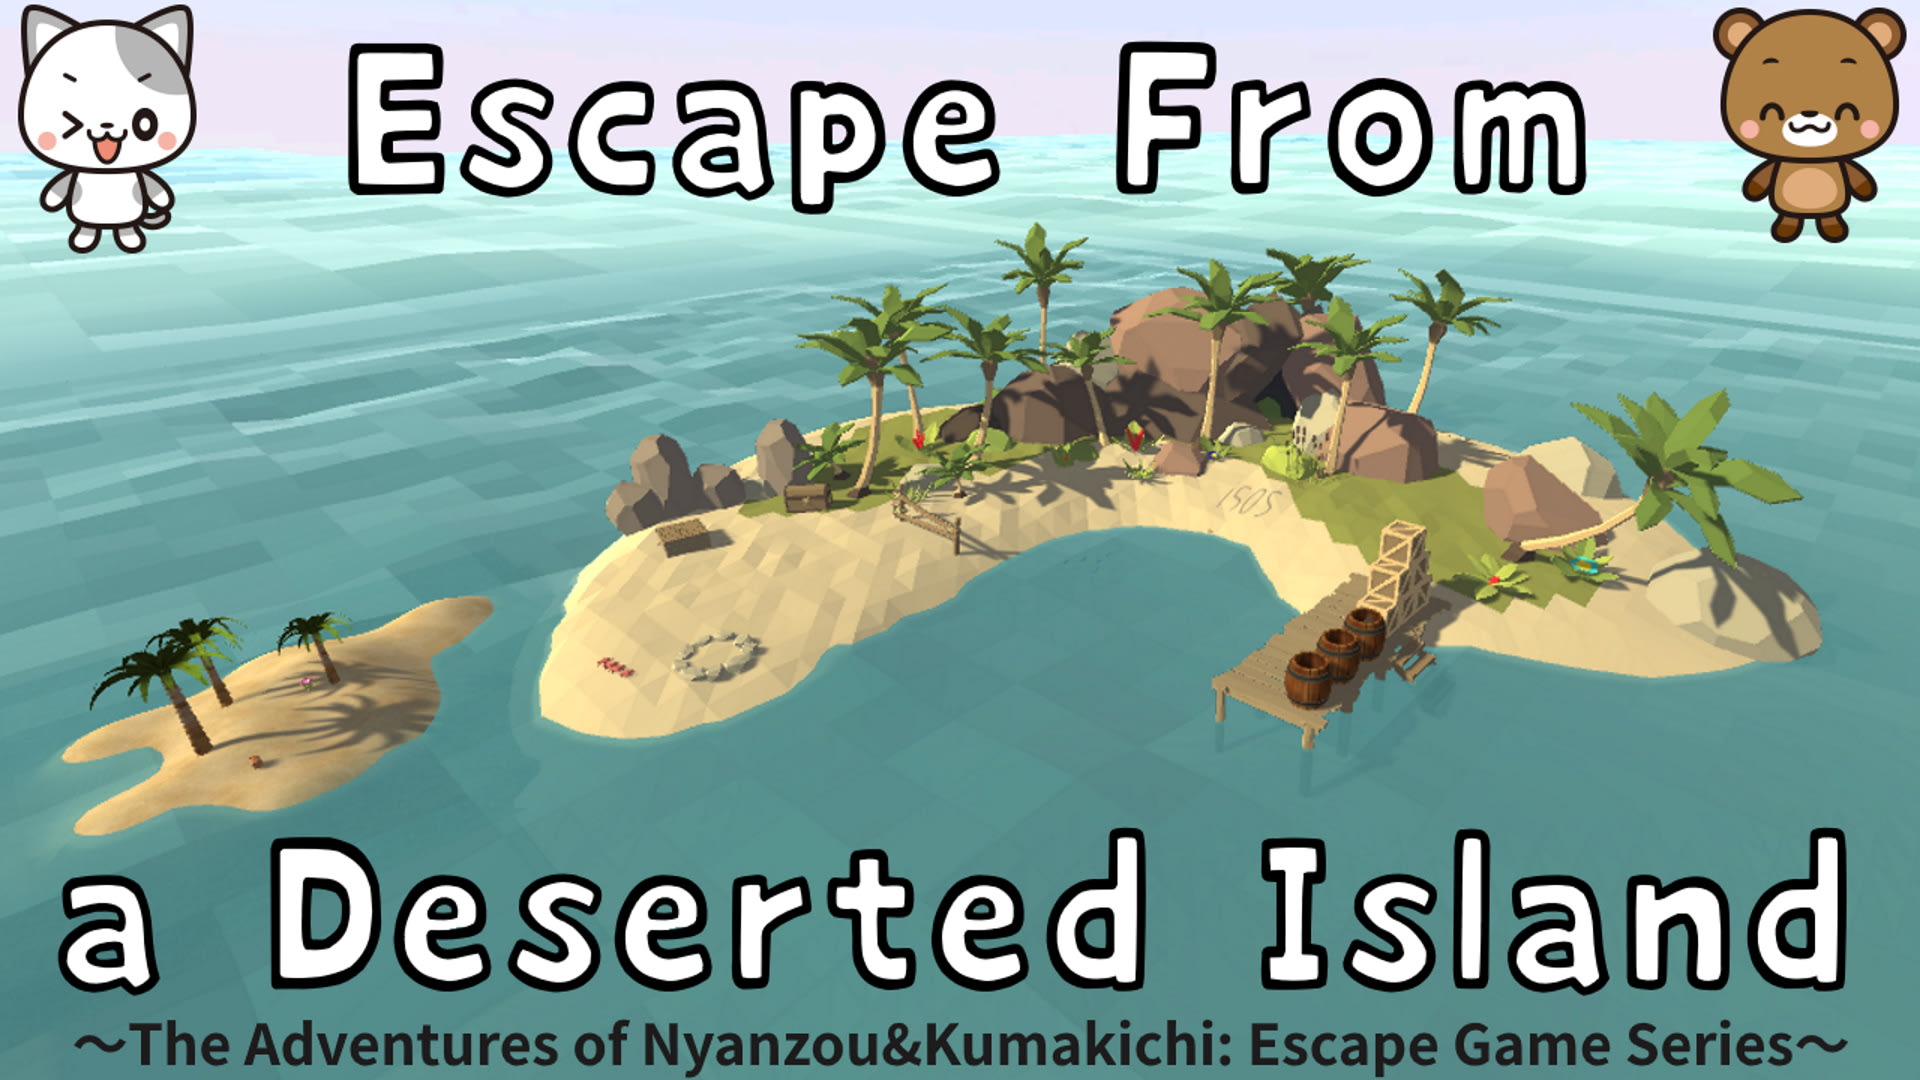 Escape From a Deserted Island
～The Adventures of Nyanzou&Kumakichi: Escape Game Series～